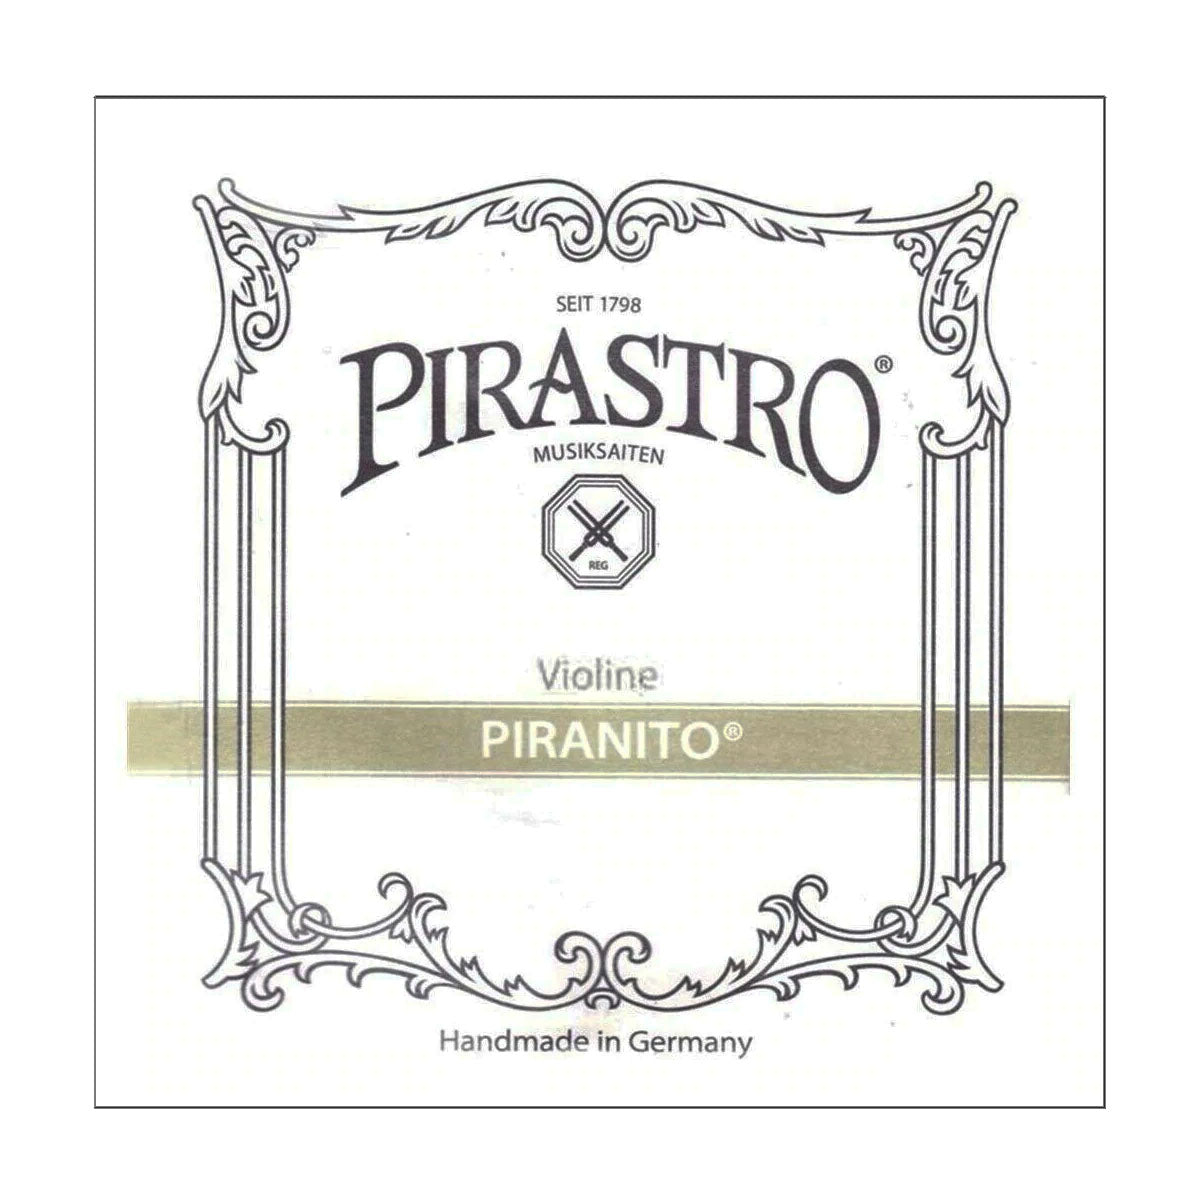 Piranito Violin Strings, Germany, full size, 4/4, 3/4, 1/2, 1/4, 1/8, hand-picked and inspected by Violins and such, with TEO musical Instruments, London Ontario Canada